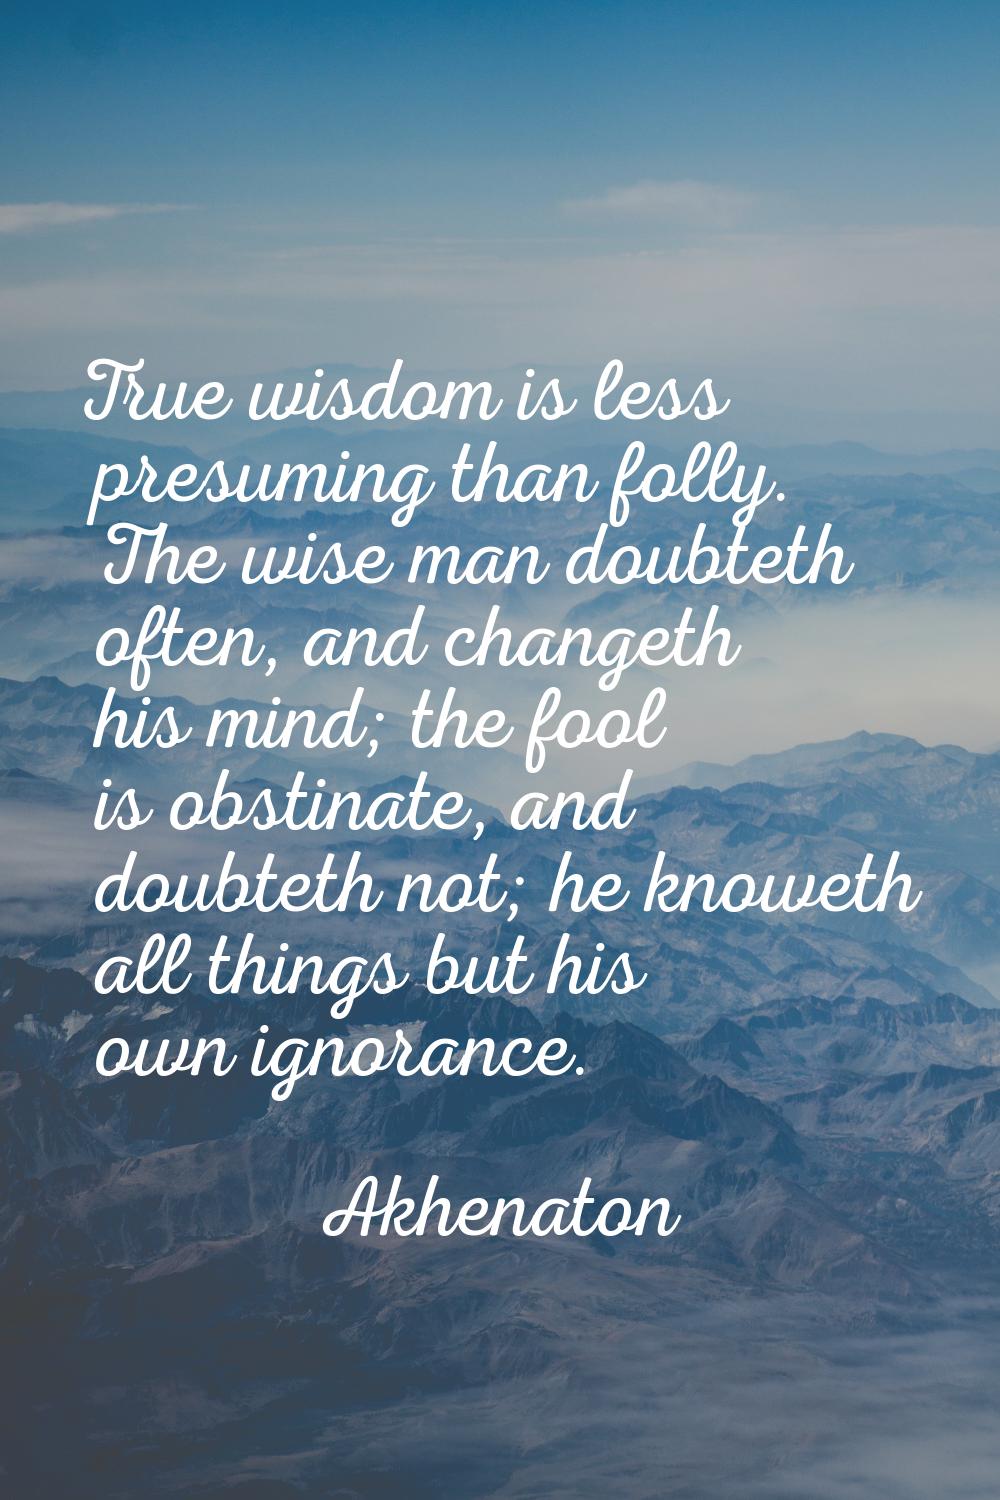 True wisdom is less presuming than folly. The wise man doubteth often, and changeth his mind; the f